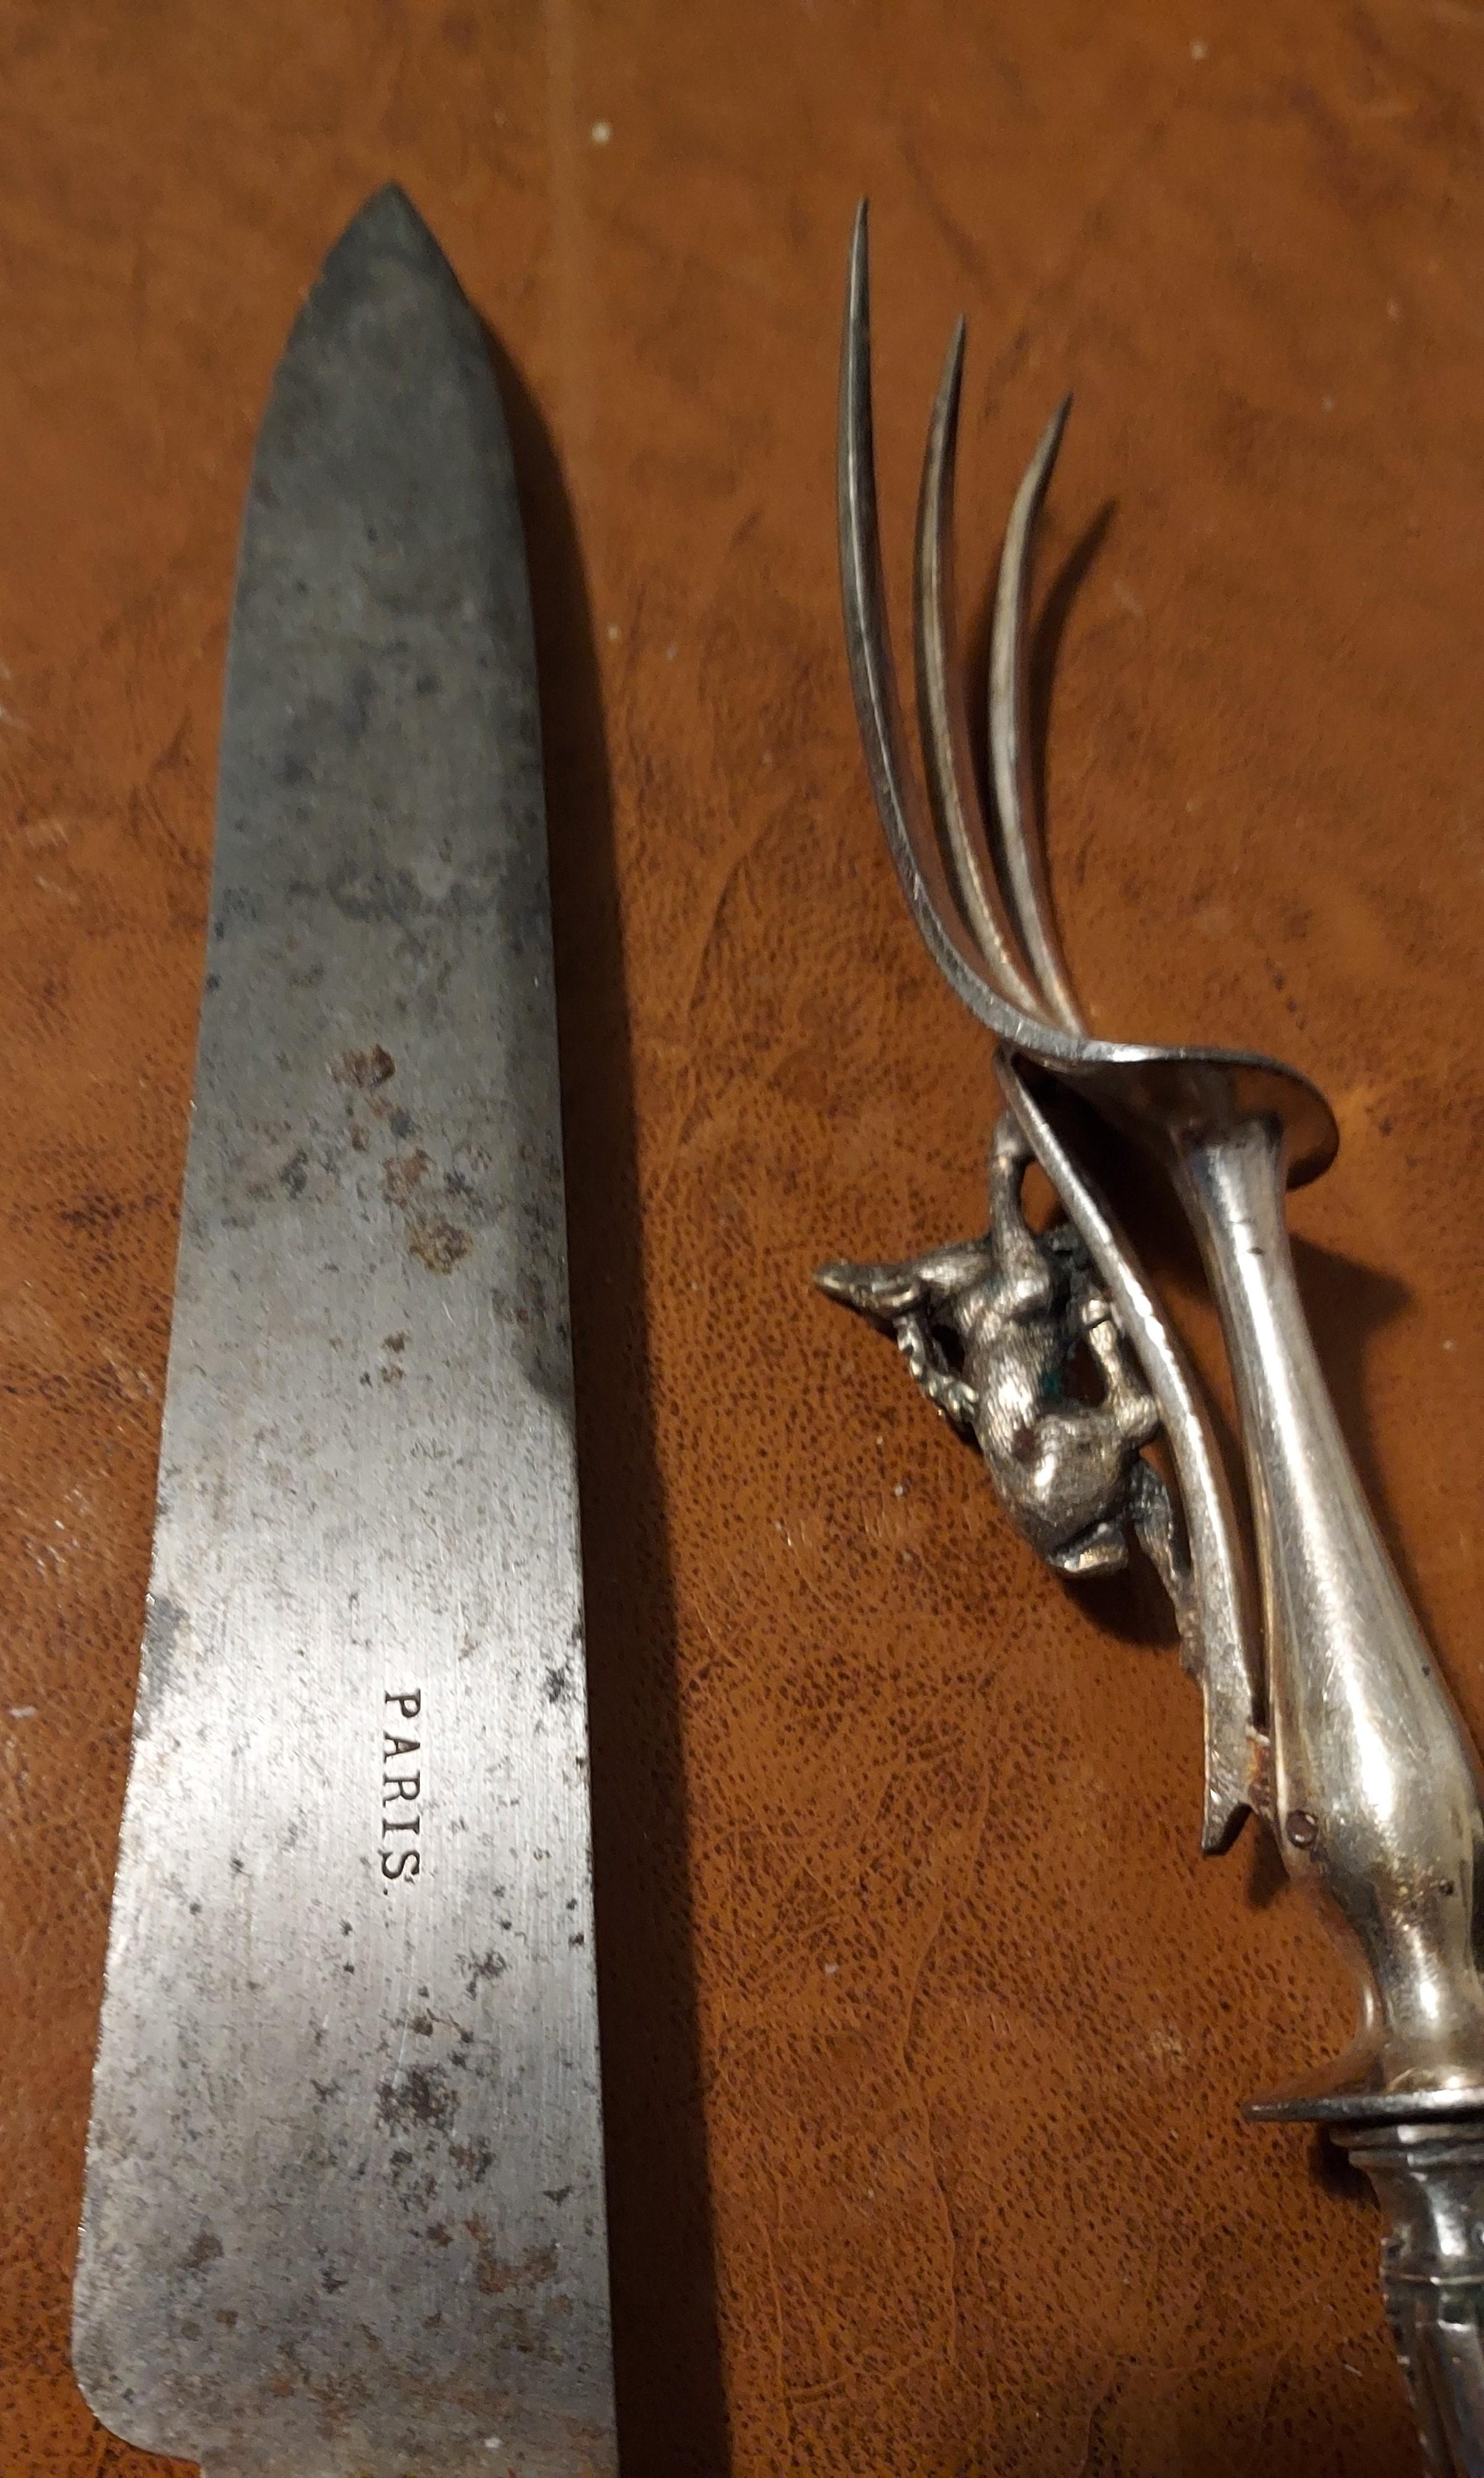 Antique Silver Carving Set of Knife and Fork embellished with a protective Stag
This set is particularily good and beautifull an excellent steel knife blade needs polishing given.  there is silver missing which can be seen clearly on the hillt where